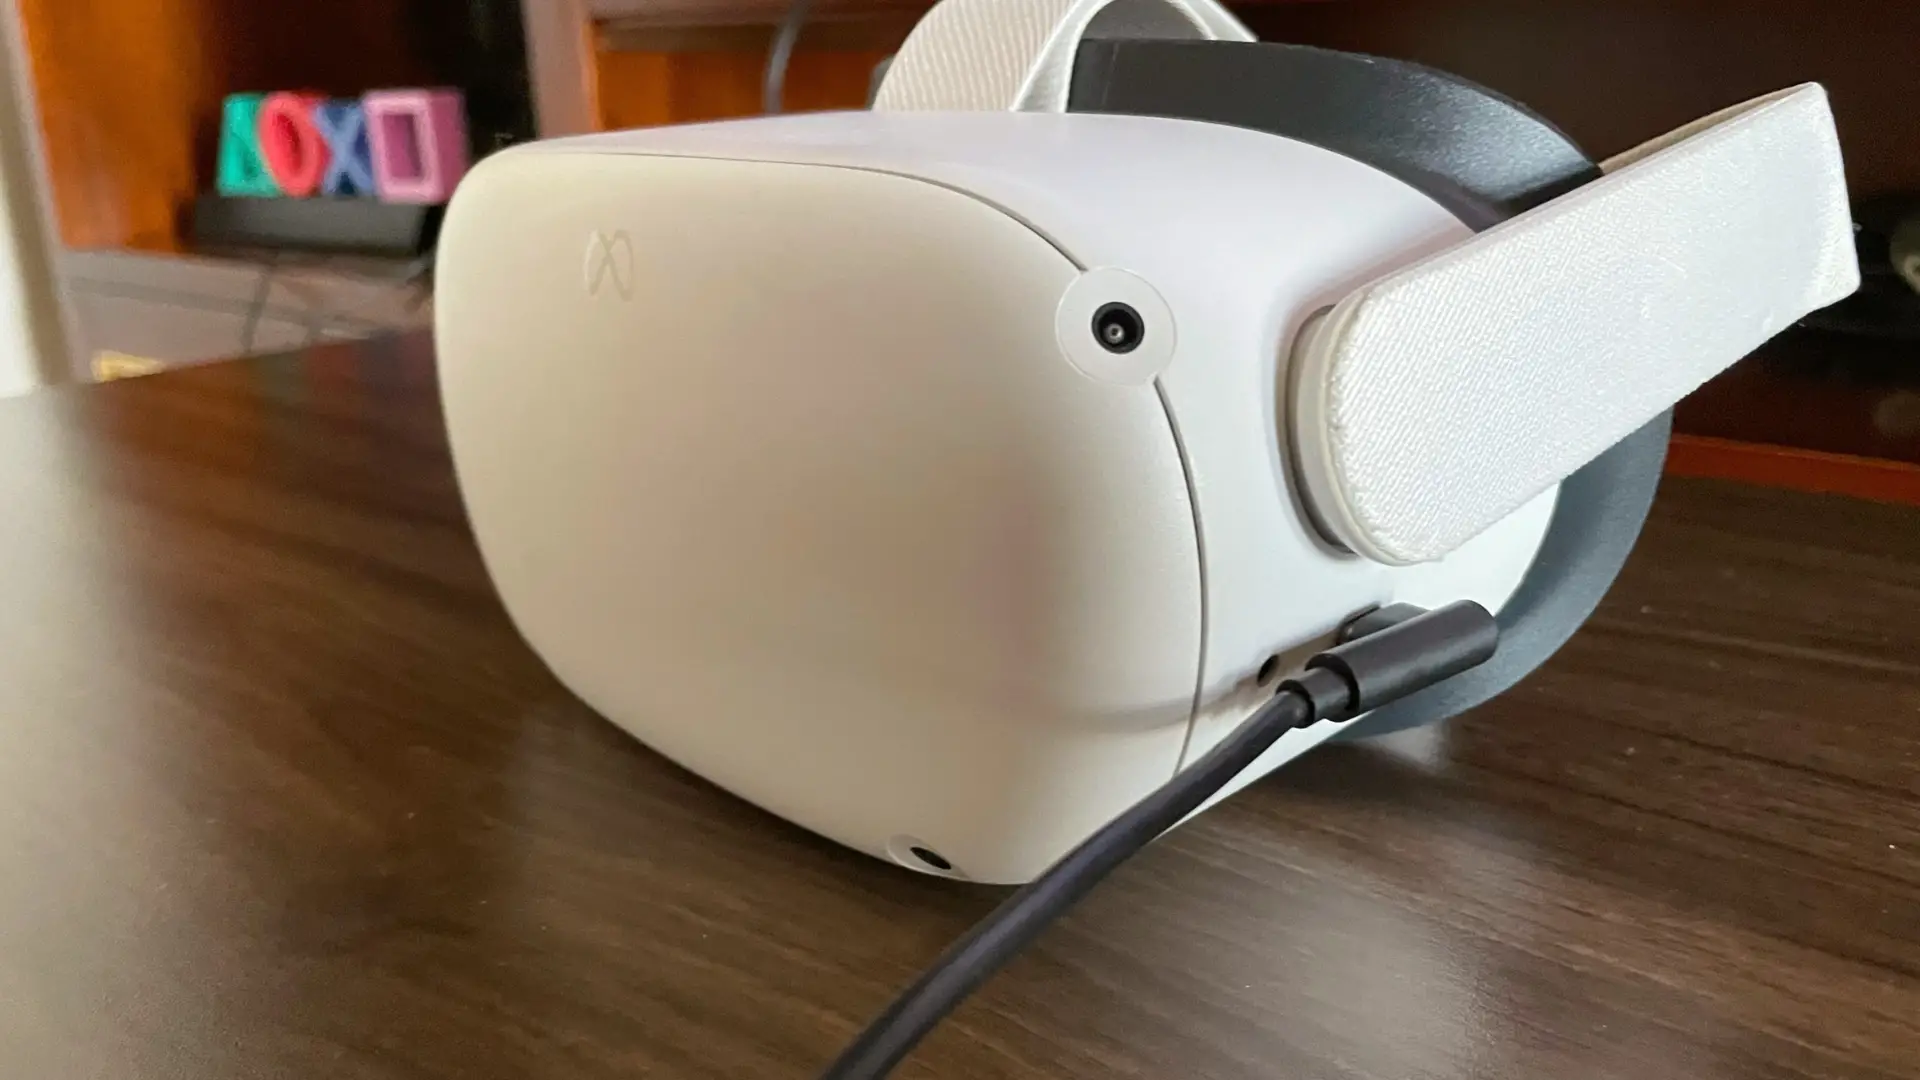 oculus quest 2 plugged in to charger